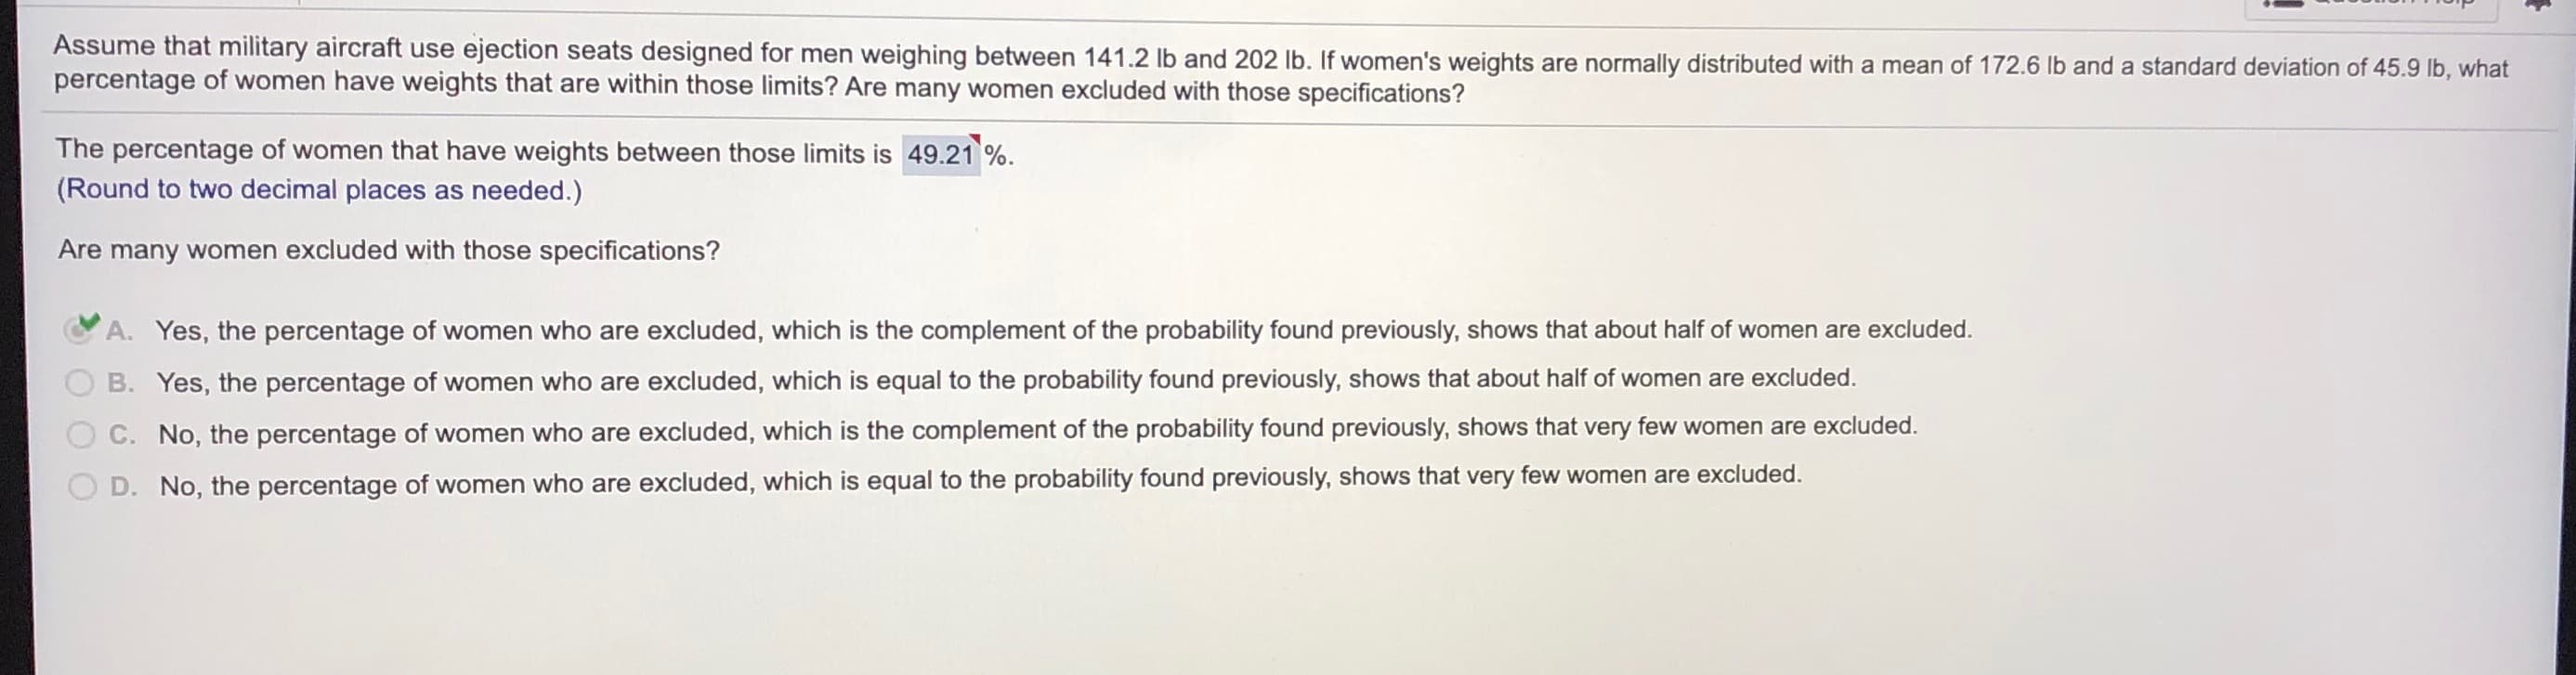 Assume that military aircraft use ejection seats designed for men weighing between 141.2 lb and 202 lb. If women's weights are normally distributed with a mean of 172.6 lb and a standard deviation of 45.9 lb, what
percentage of women have weights that are within those limits? Are many women excluded with those specifications?
The percentage of women that have weights between those limits is 49.21 %.
(Round to two decimal places as needed.)
Are many women excluded with those specifications?
A. Yes, the percentage of women who are excluded, which is the complement of the probability found previously, shows that about half of women are excluded.
B. Yes, the percentage of women who are excluded, which is equal to the probability found previously, shows that about half of women are excluded.
C. No, the percentage of women who are excluded, which is the complement of the probability found previously, shows that very few women are excluded.
D. No, the percentage of women who are excluded, which is equal to the probability found previously, shows that very few women are excluded.
